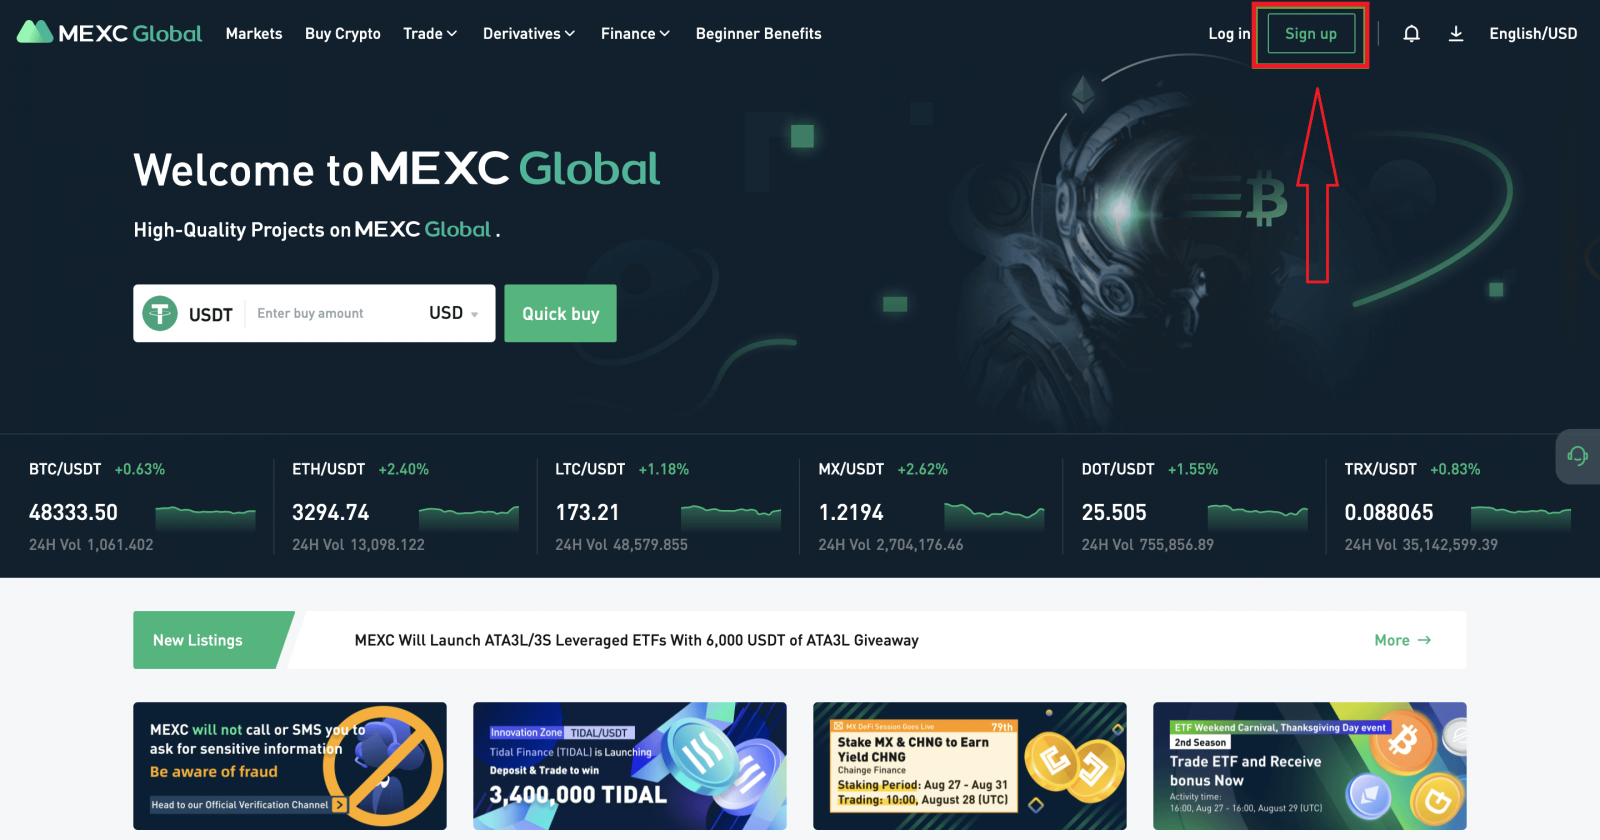 How to Open Account and Deposit at MEXC